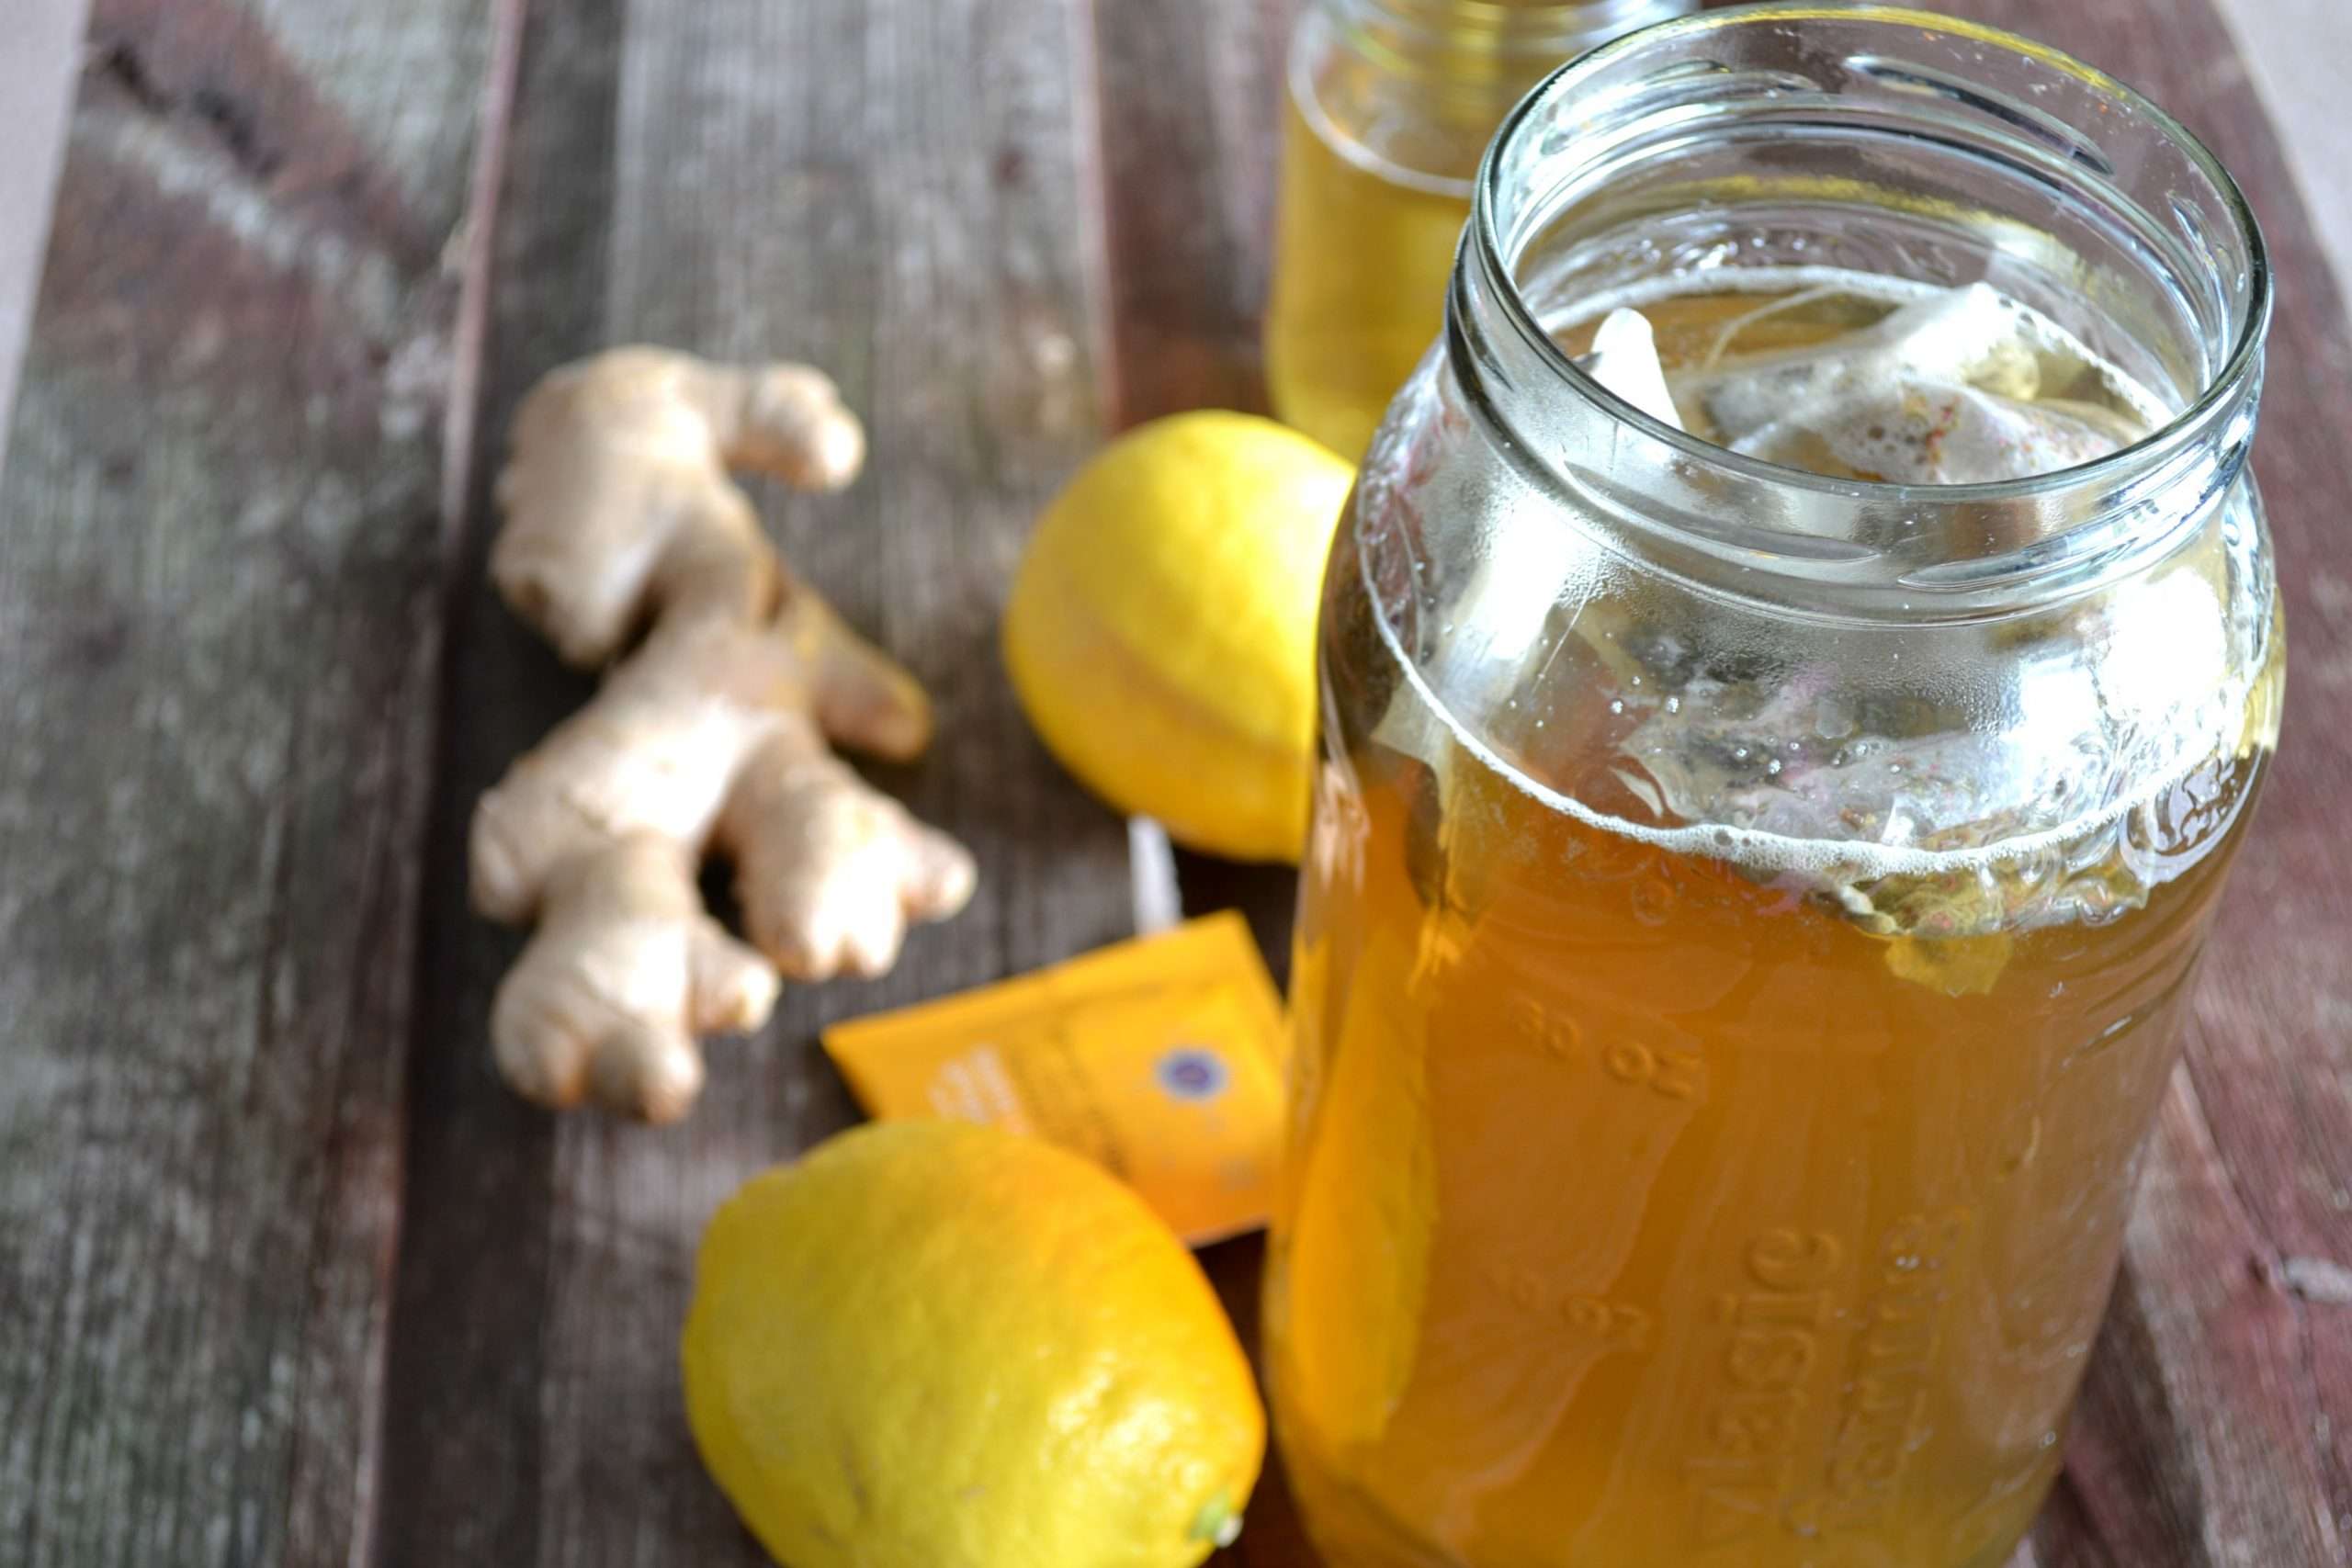 Green Tea with Ginger and Lemon for weight loss and feeling energized